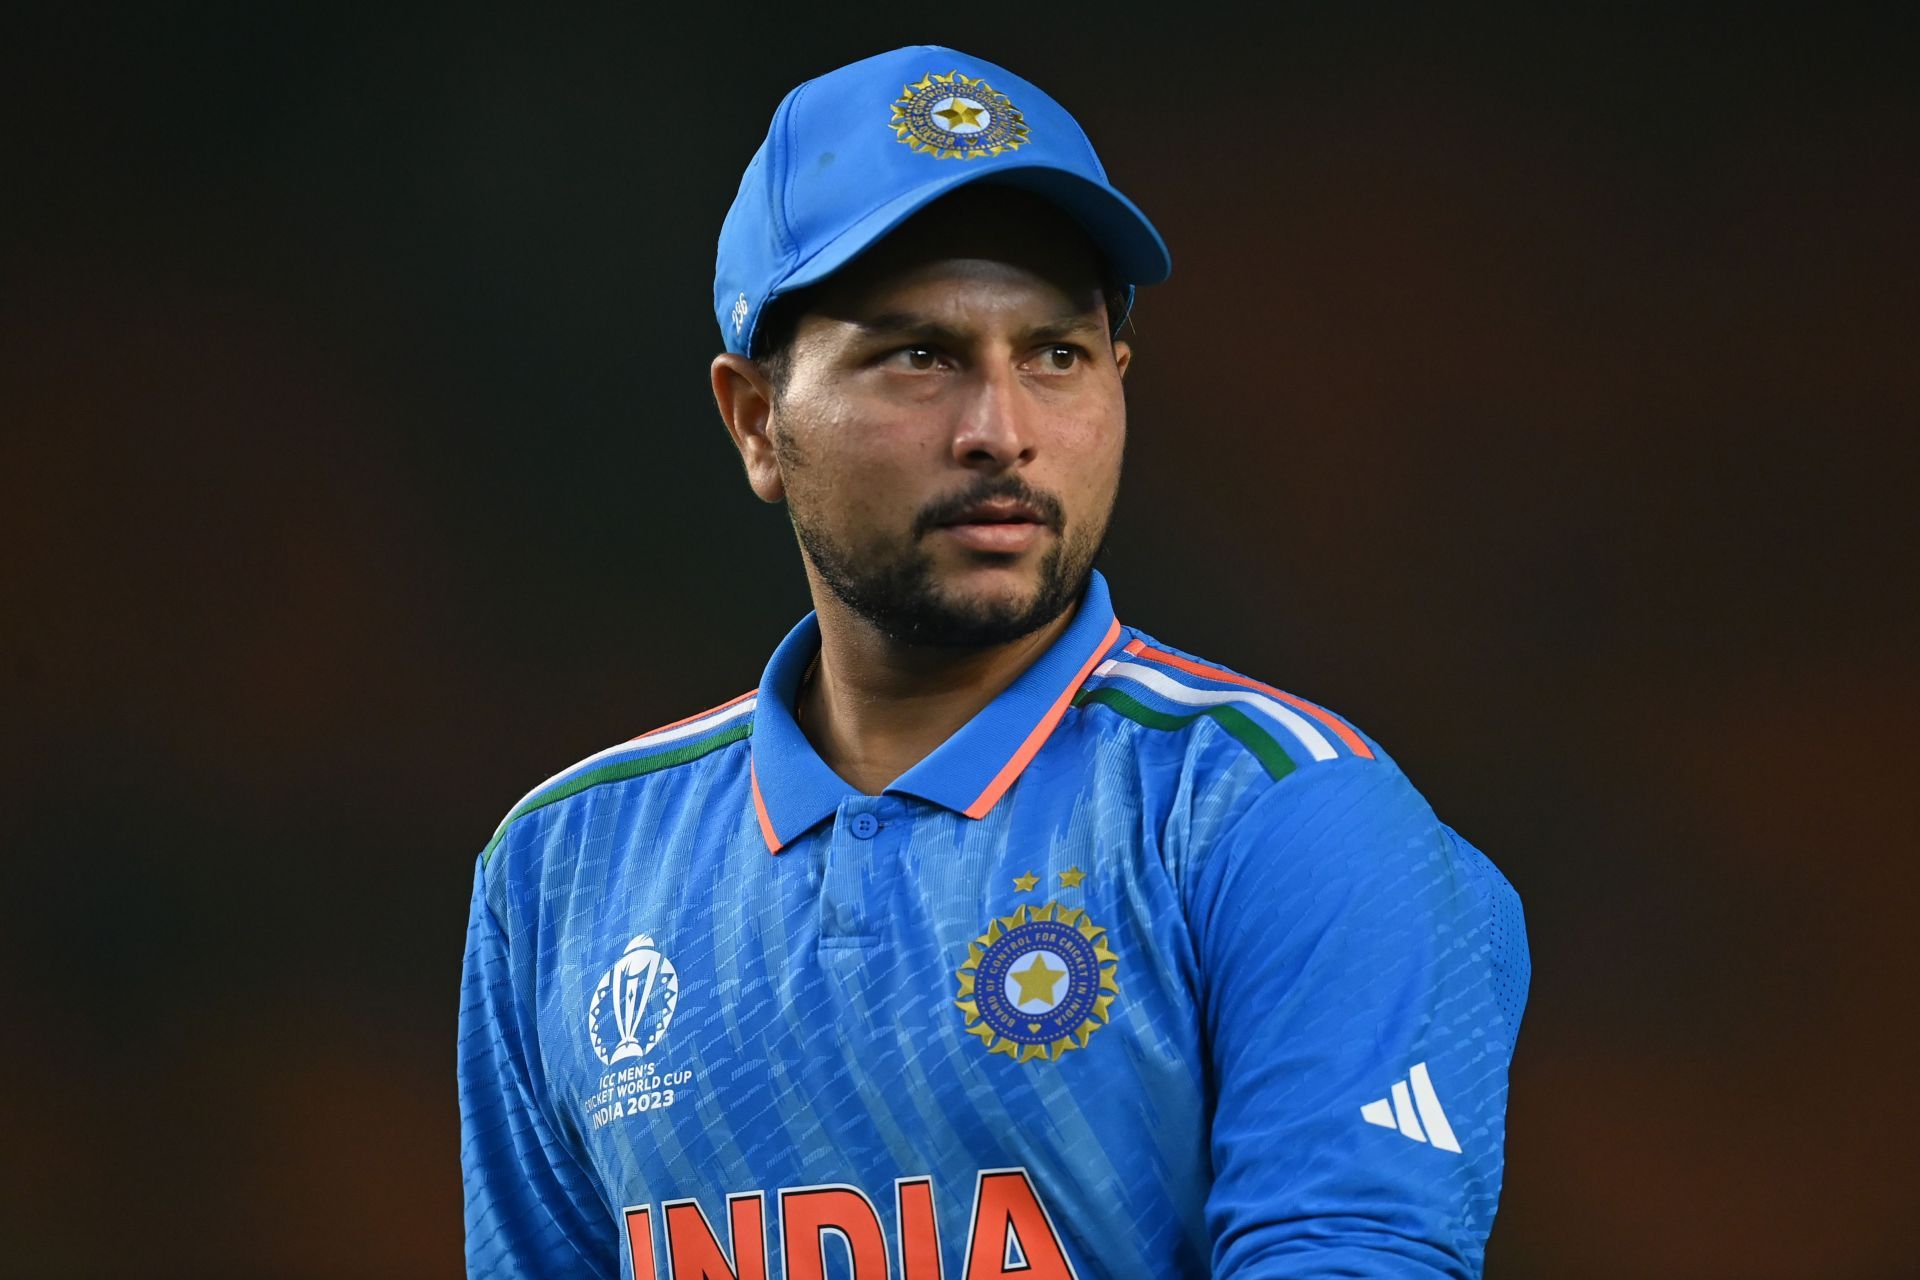 Kuldeep Yadav has been a reliable performer for the Men in Blue of late